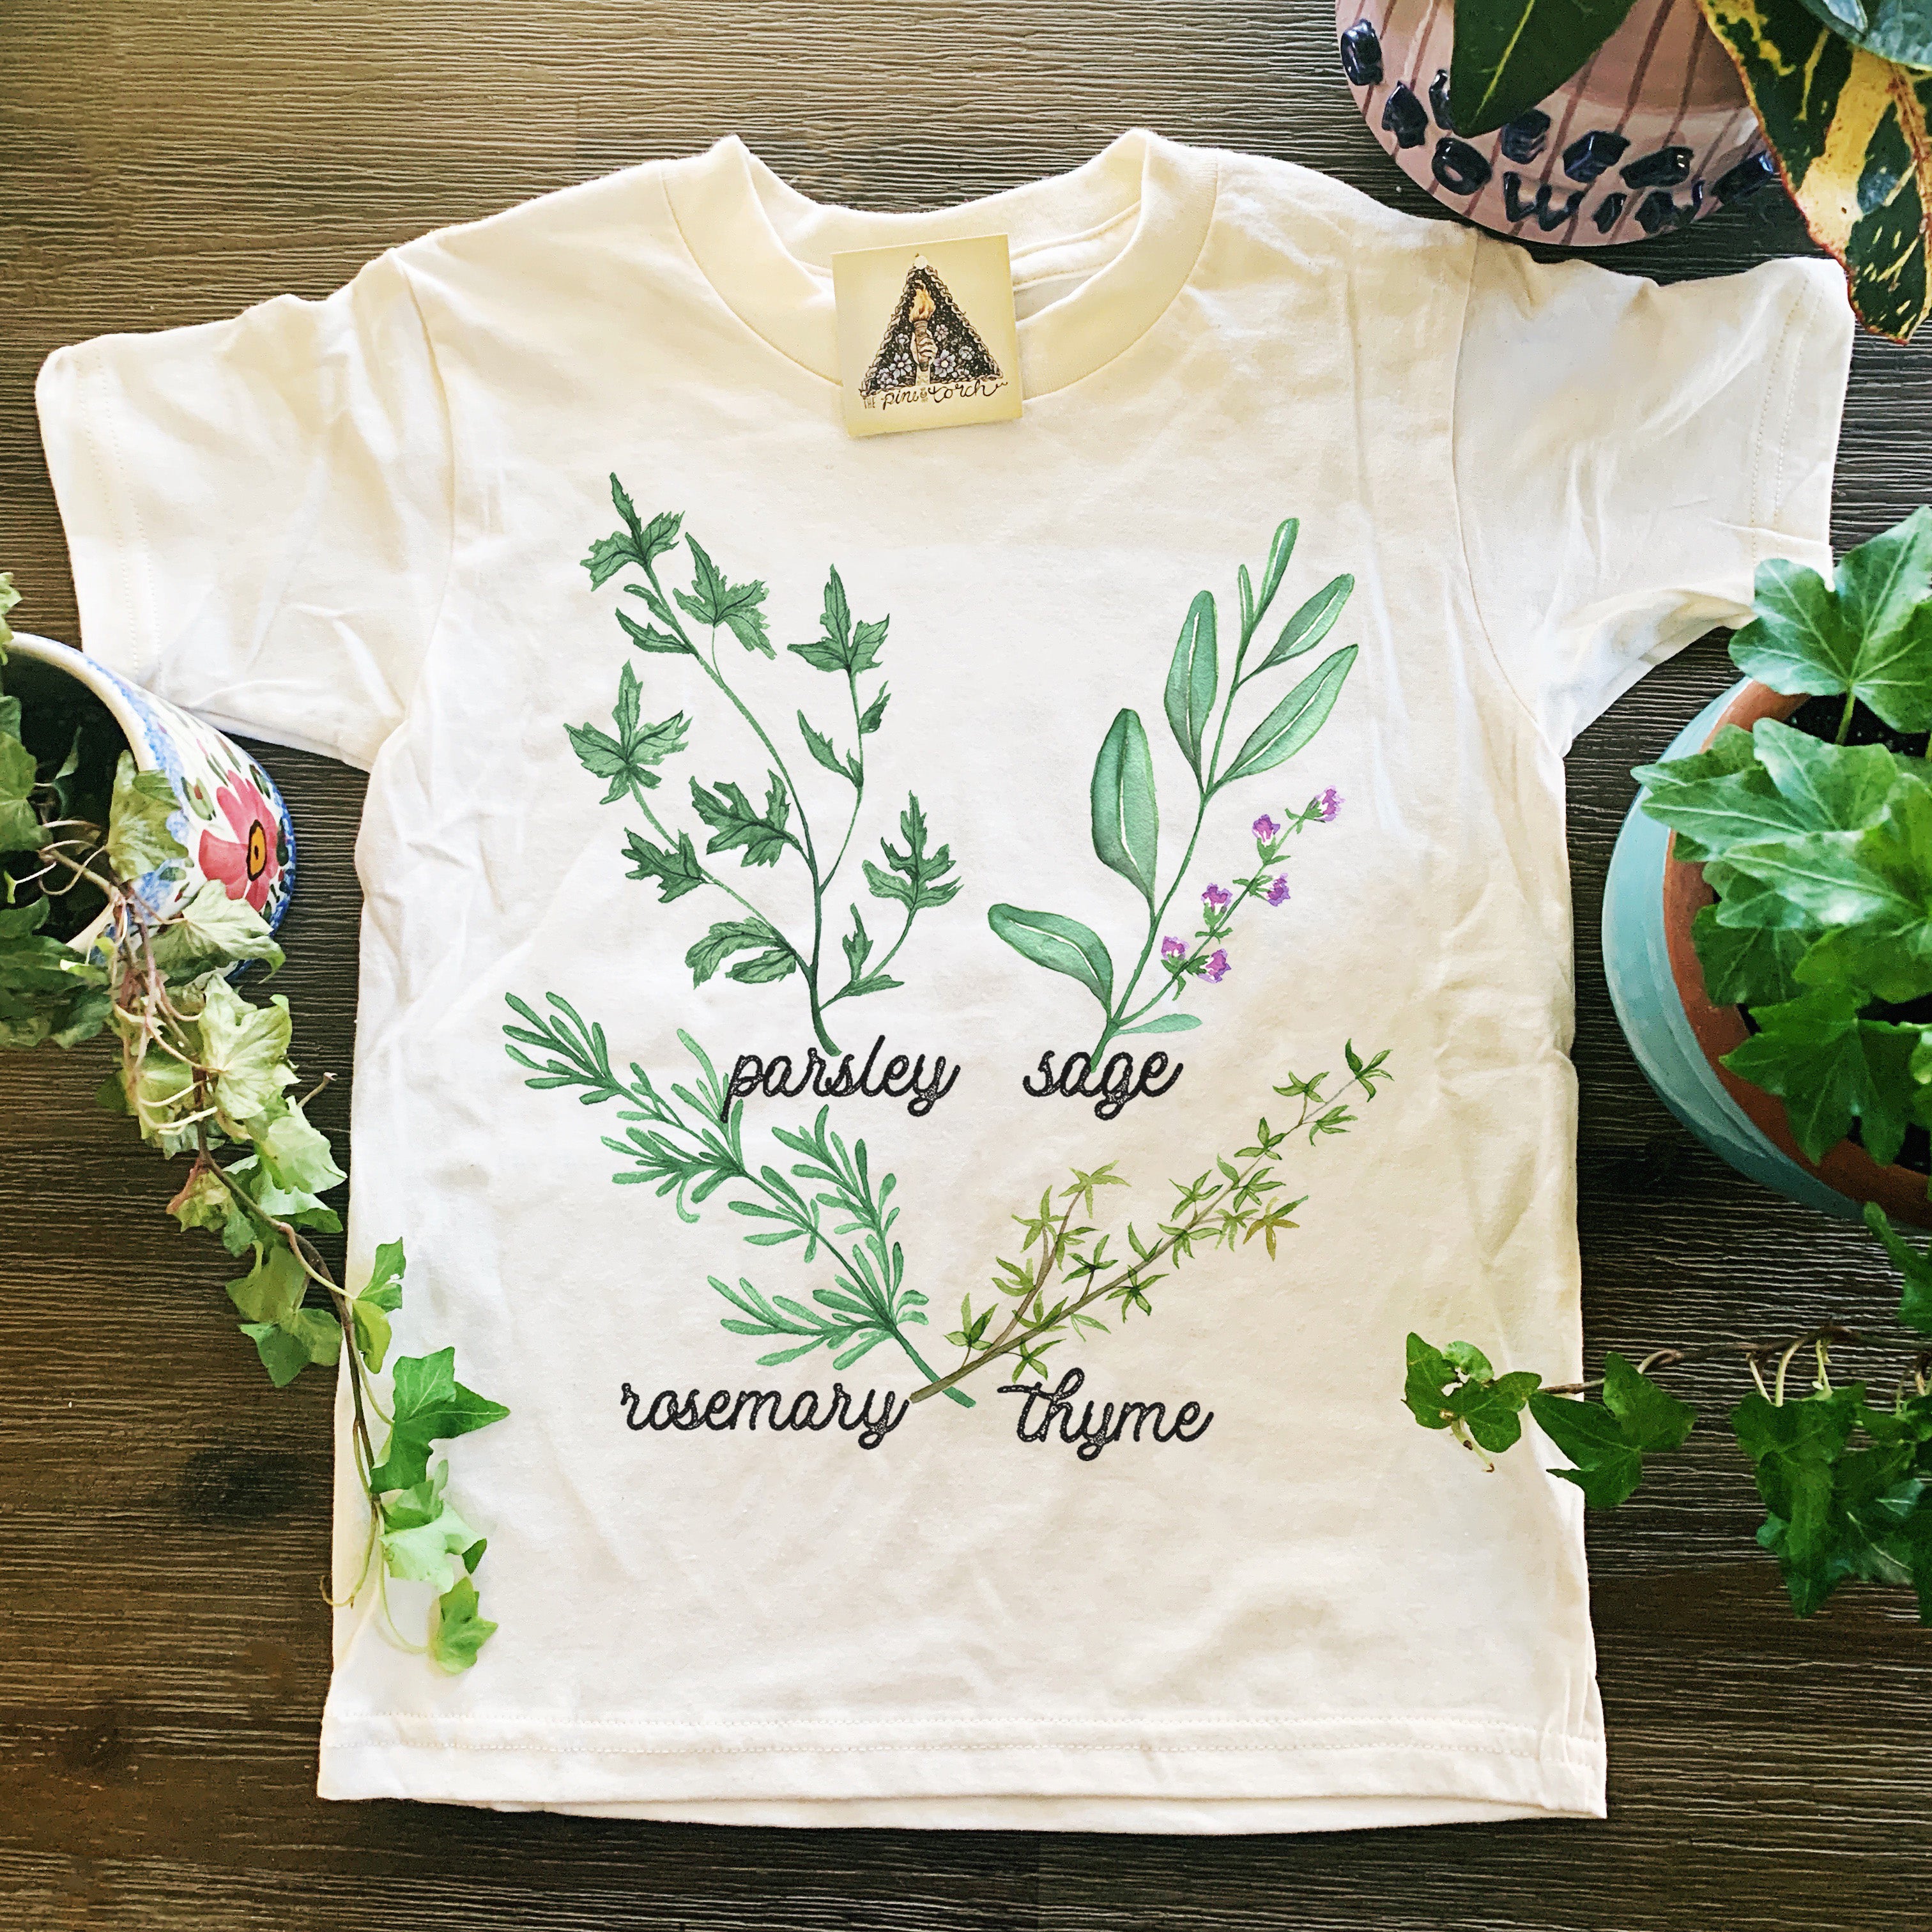 « PARSLEY, SAGE, ROSEMARY, AND THYME » KID'S TEE